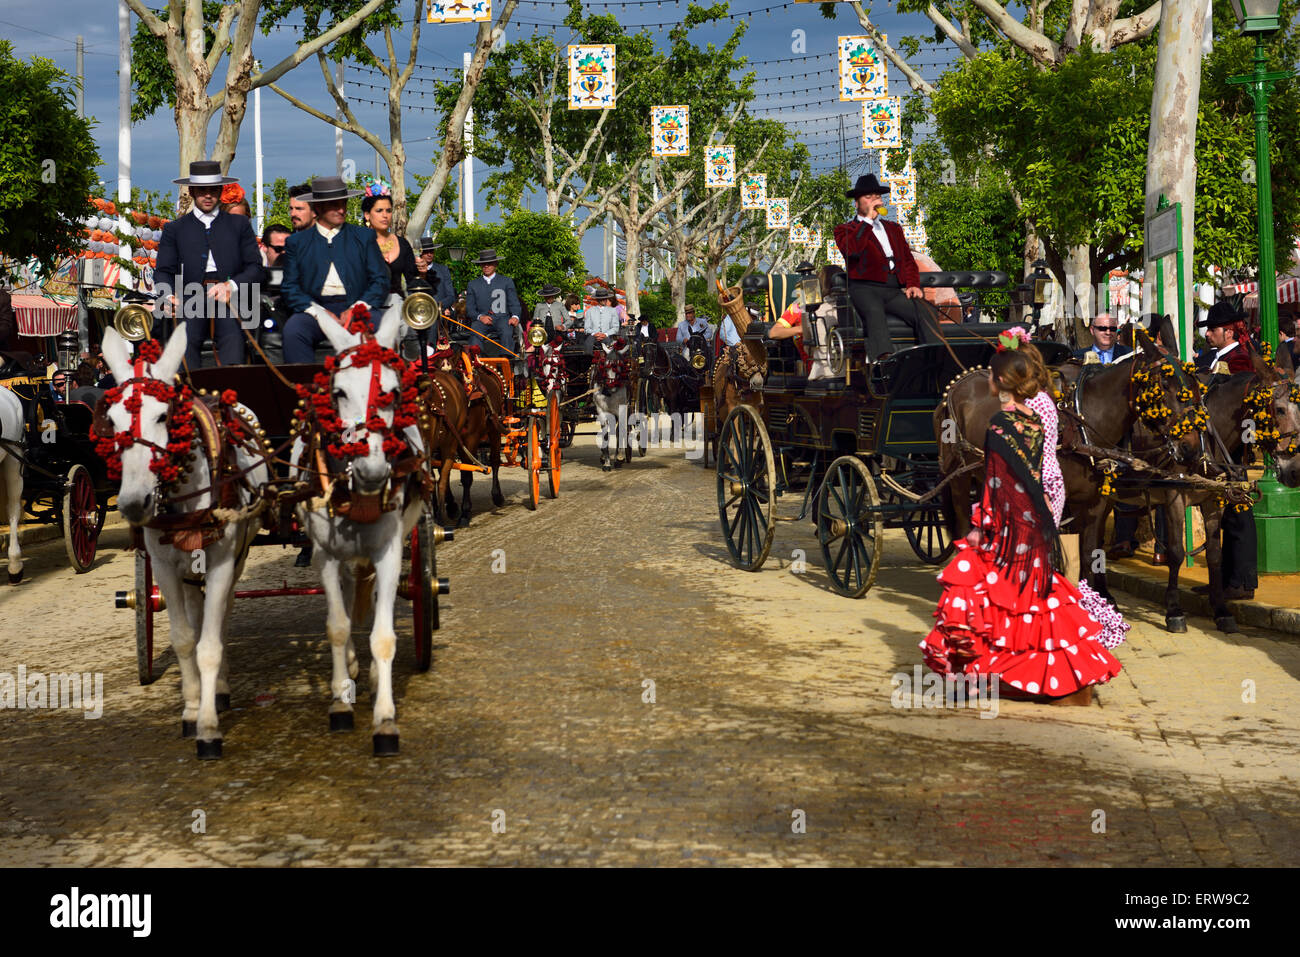 Horse and mule drawn carriages on cobblestone street of Seville April Fair Stock Photo